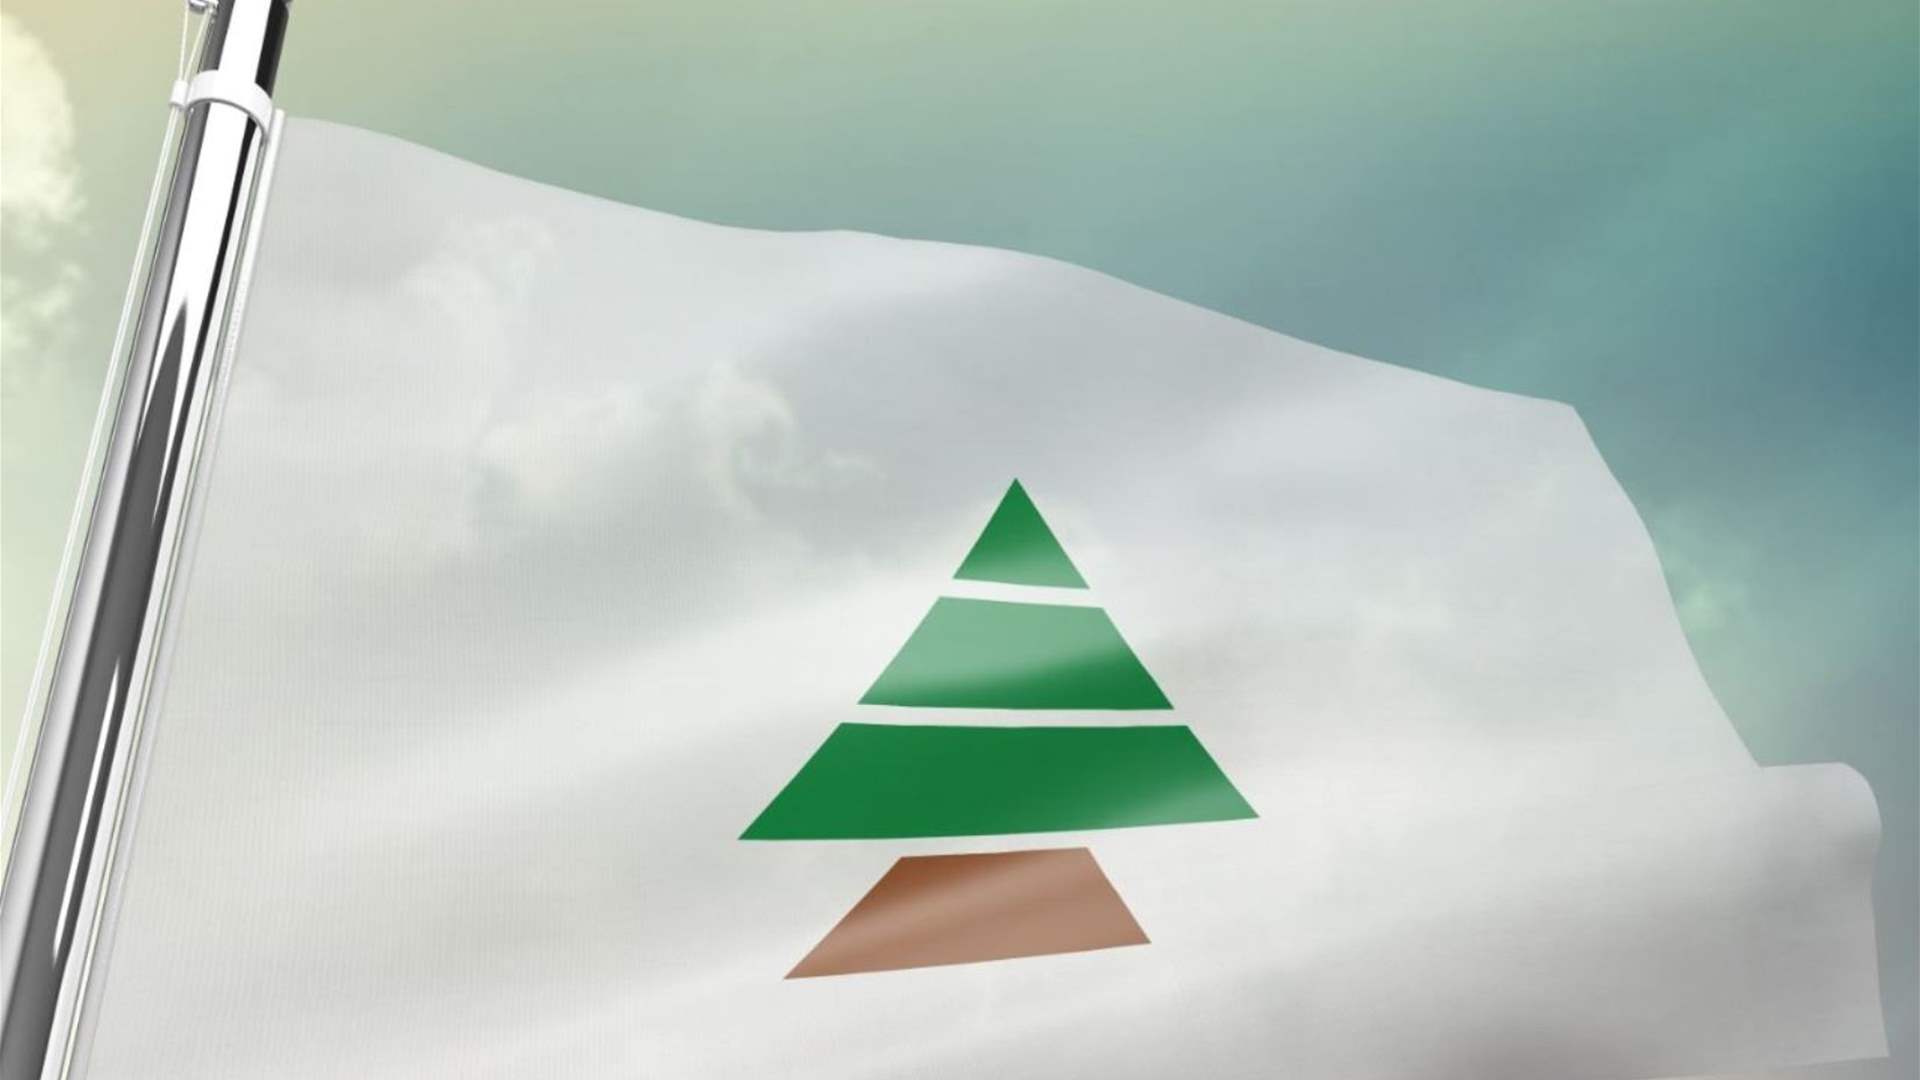 Kataeb Party expresses concerns over stagnation in Lebanon, advocates for reforms